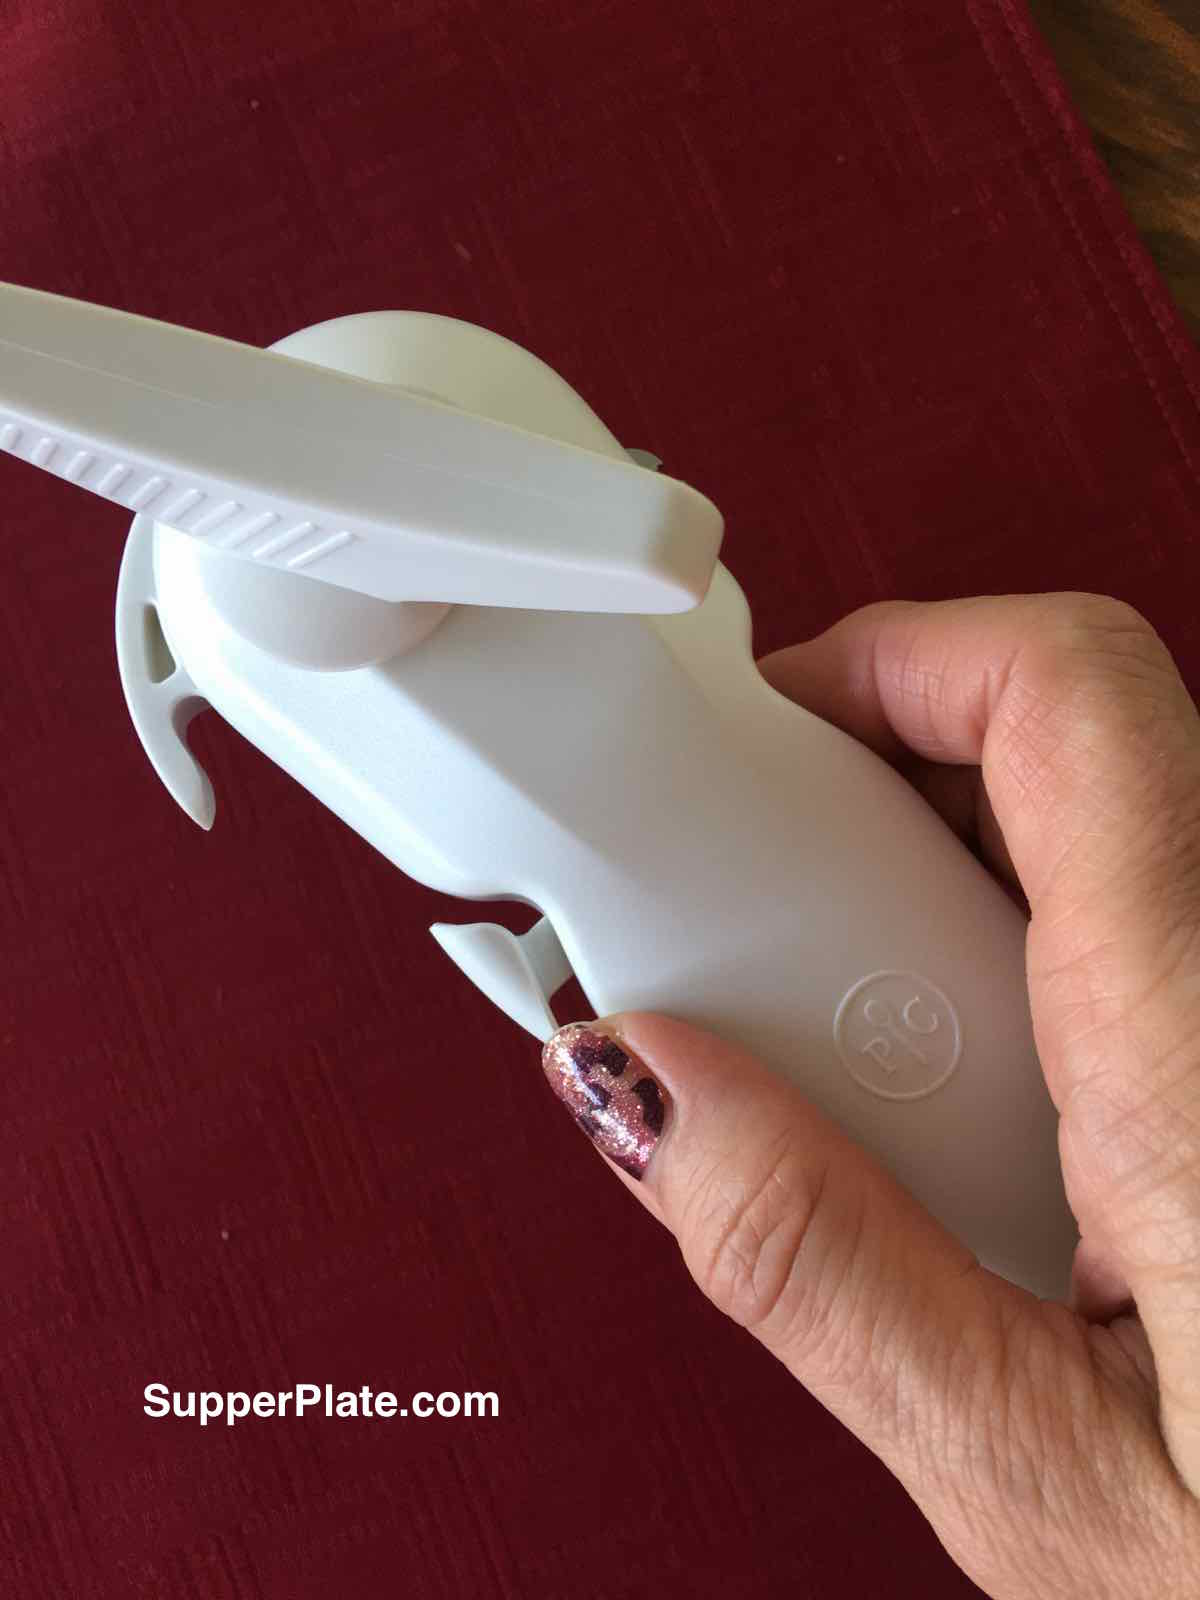 pampered chef smooth edge can opener